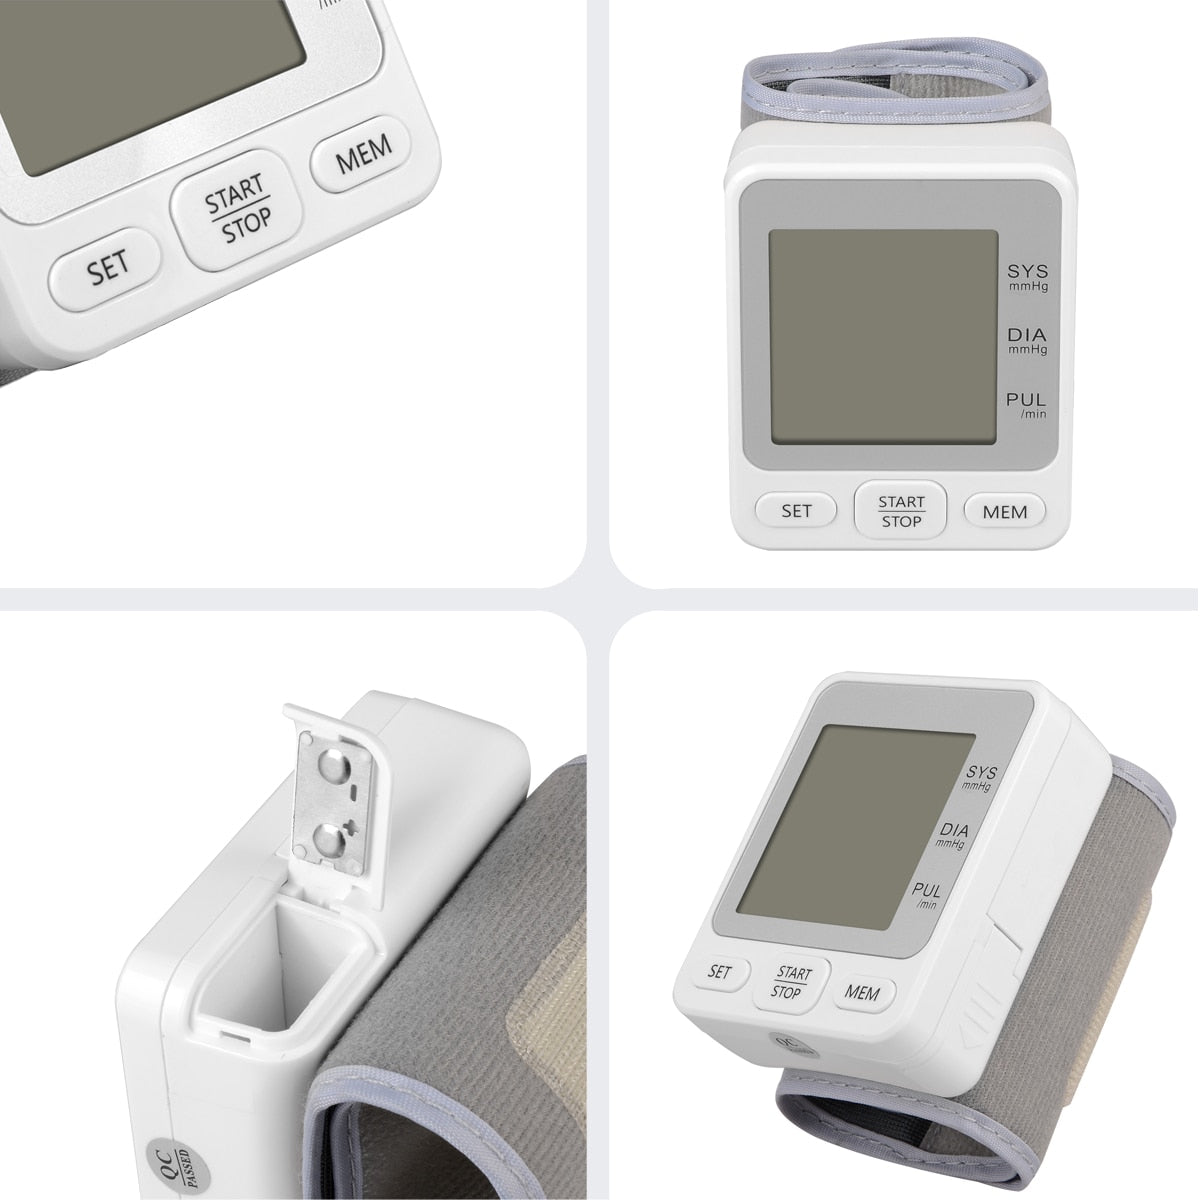 Portable Wrist Blood Pressure Monitor with Voice